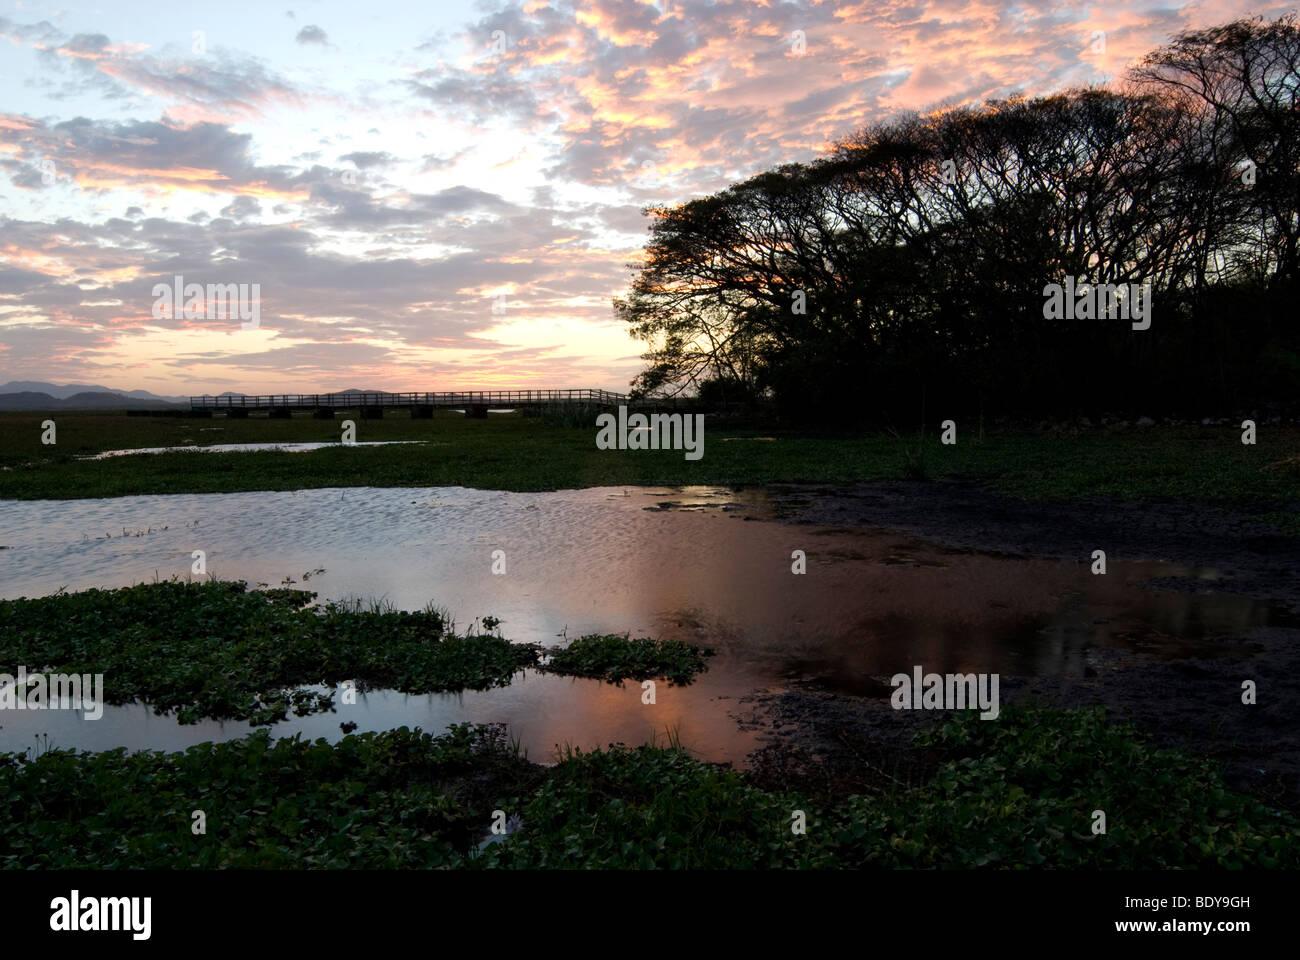 Swamp at Palo Verde National Park, Costa Rica at dusk. Stock Photo